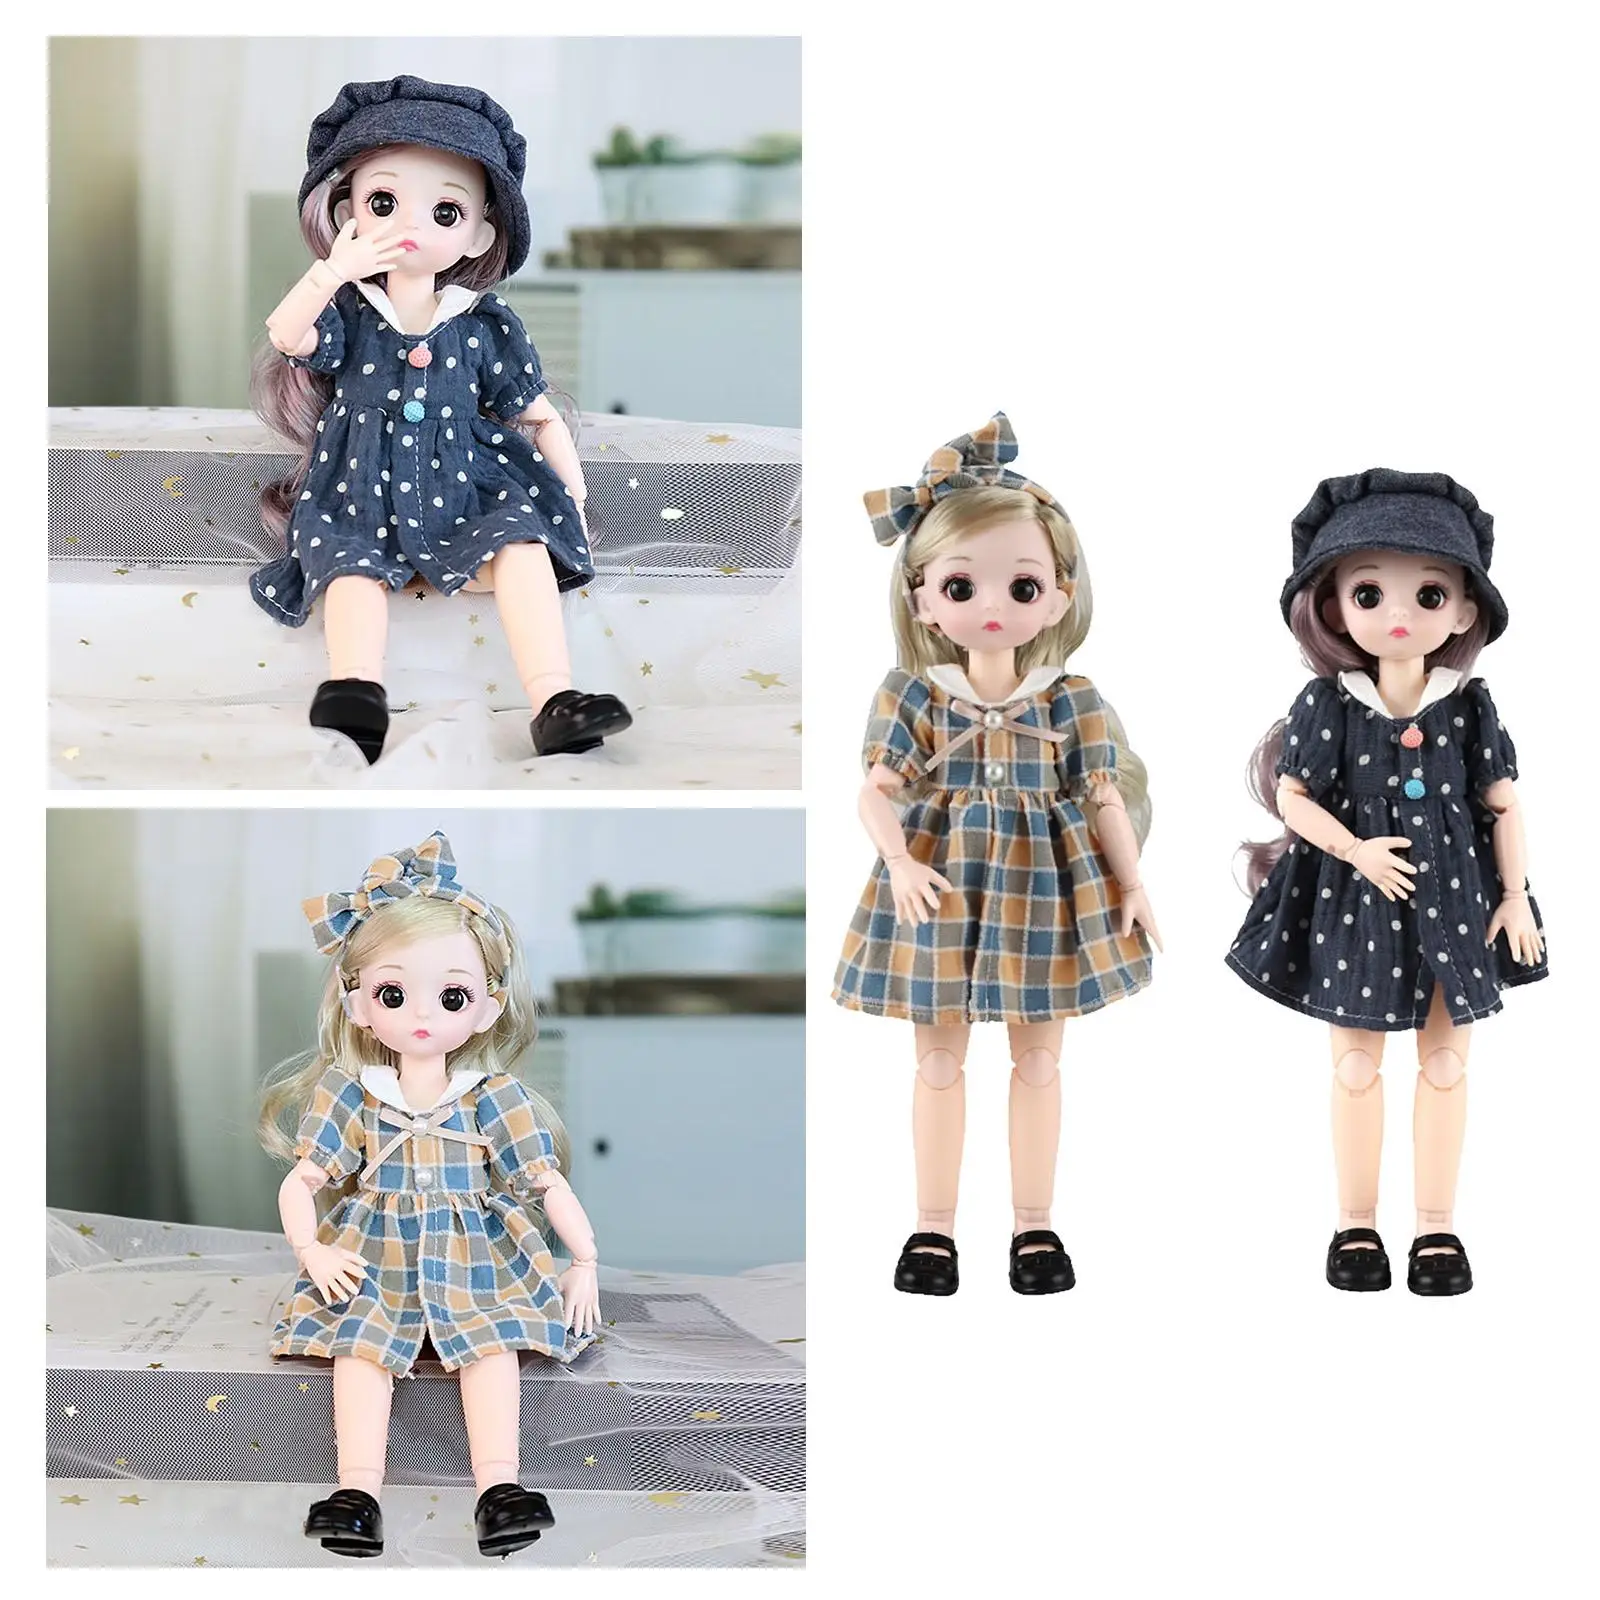 

30cm 1/6 BJD Doll 12 Flexible Joint Princess Doll Ball Joint Dolls for Kids Gilr Birthday Gift Play Doll with Dress